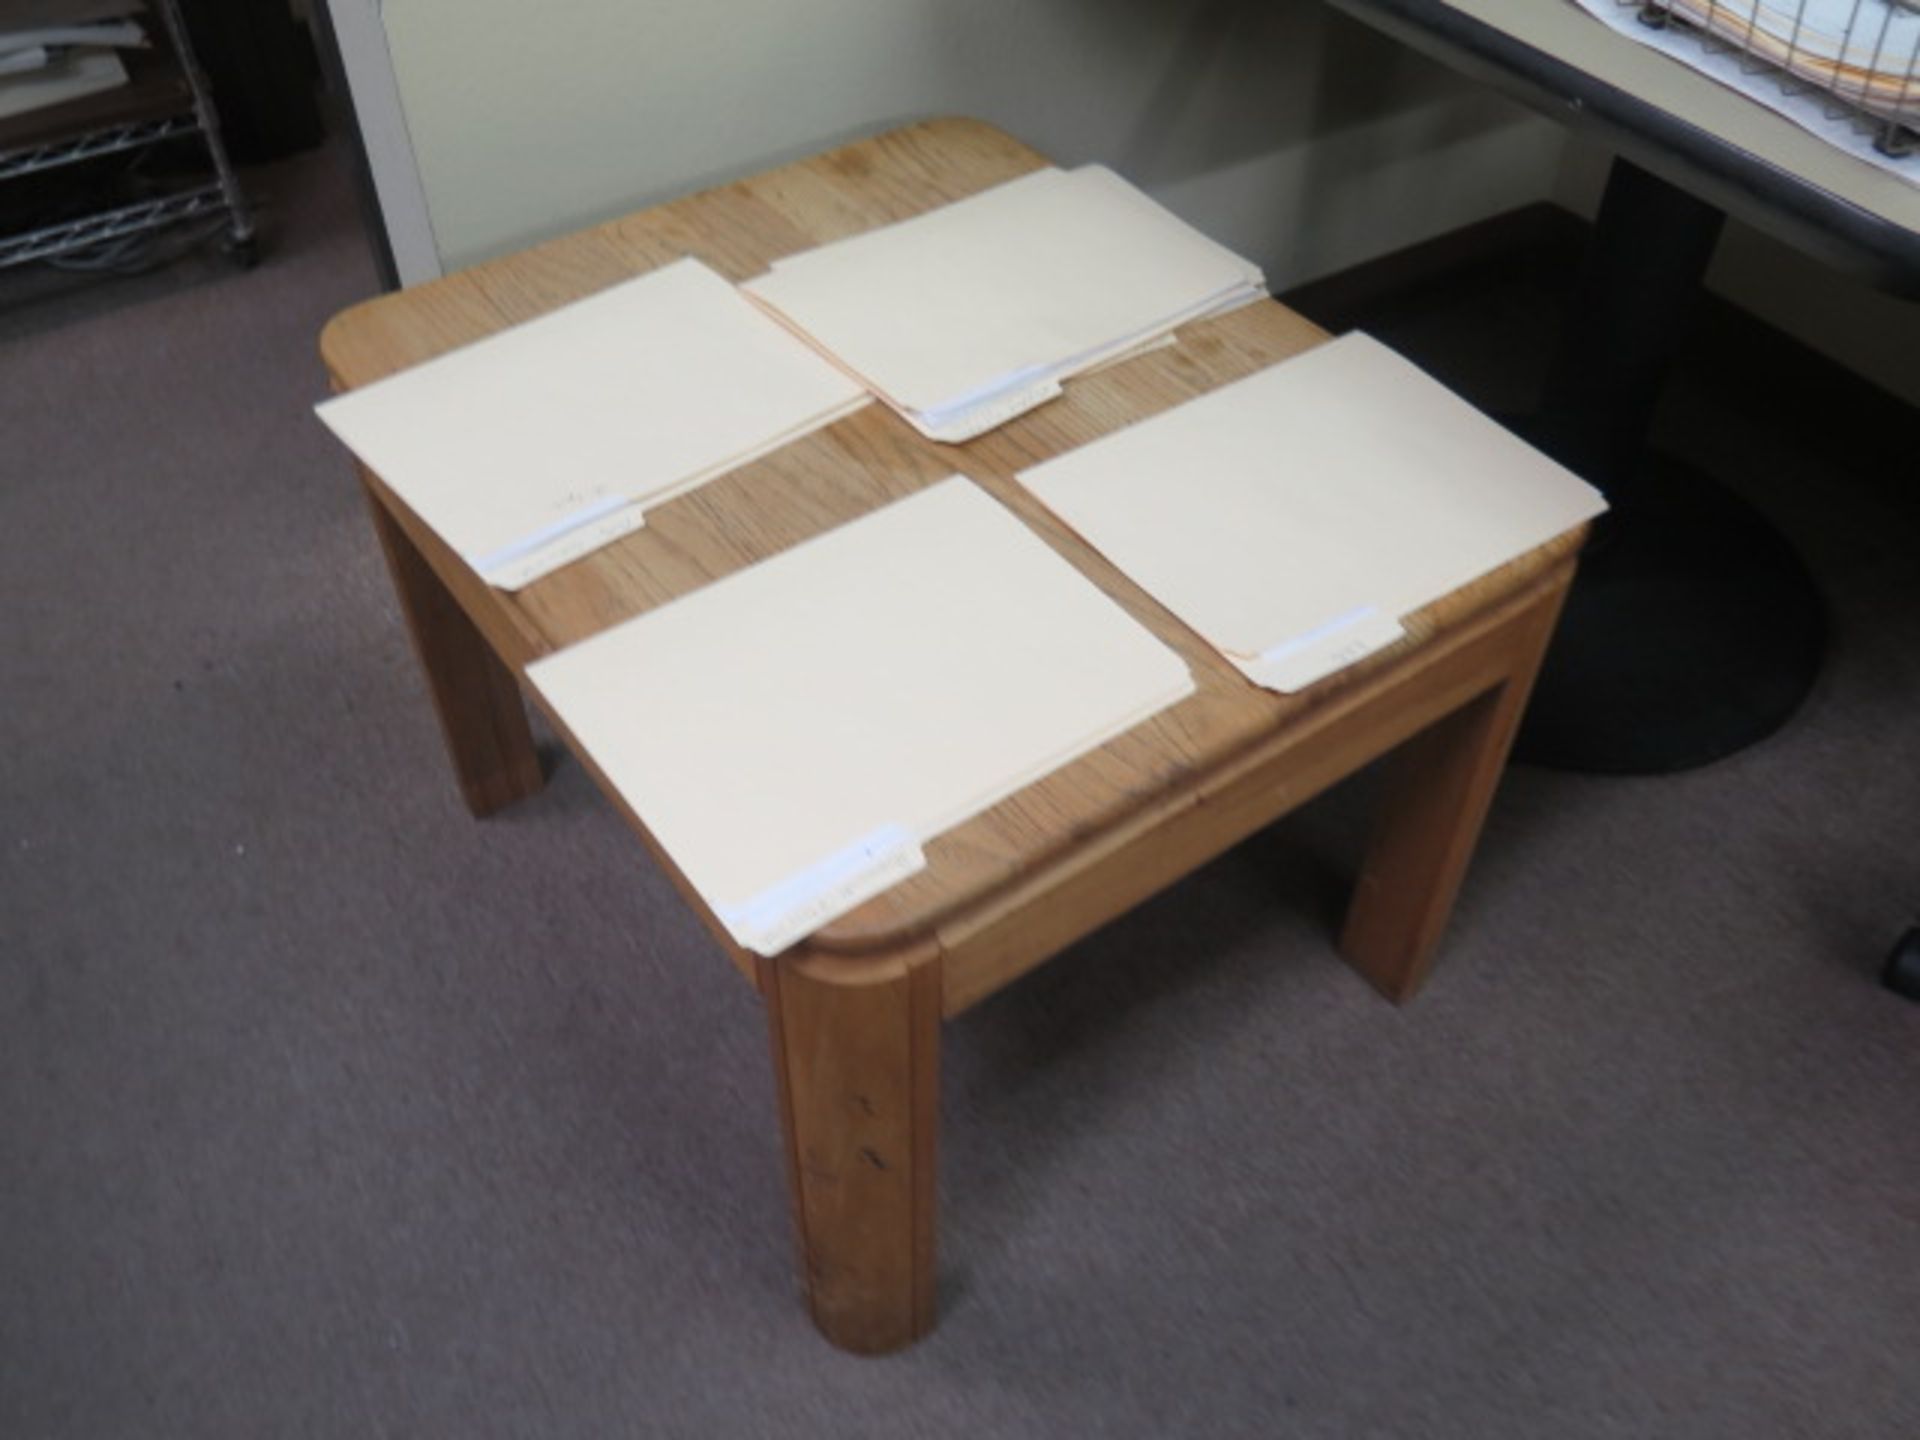 Modular Dedks, Tables and Chairs (NO COMPUTERS OR ELECTRONICS) - Image 5 of 6